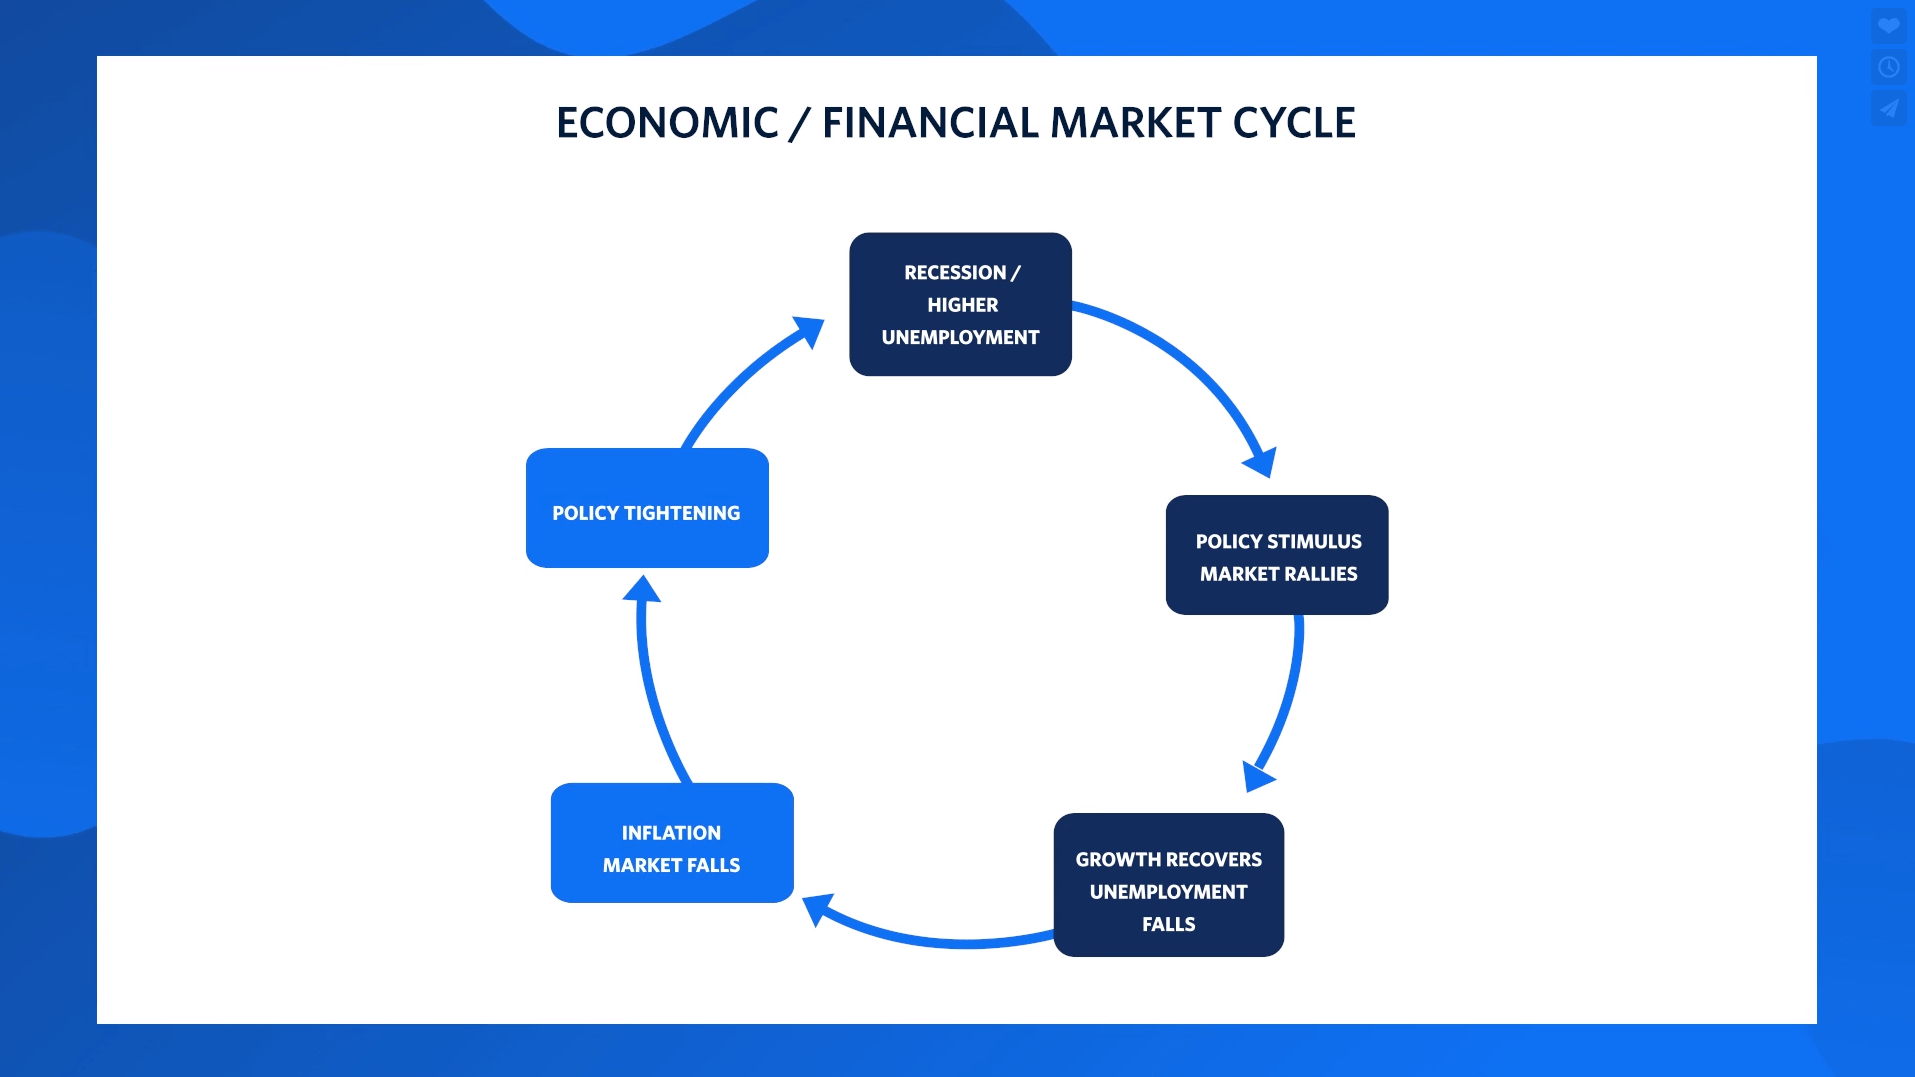 Chart 2: Chart showing the economic / financial cycle.